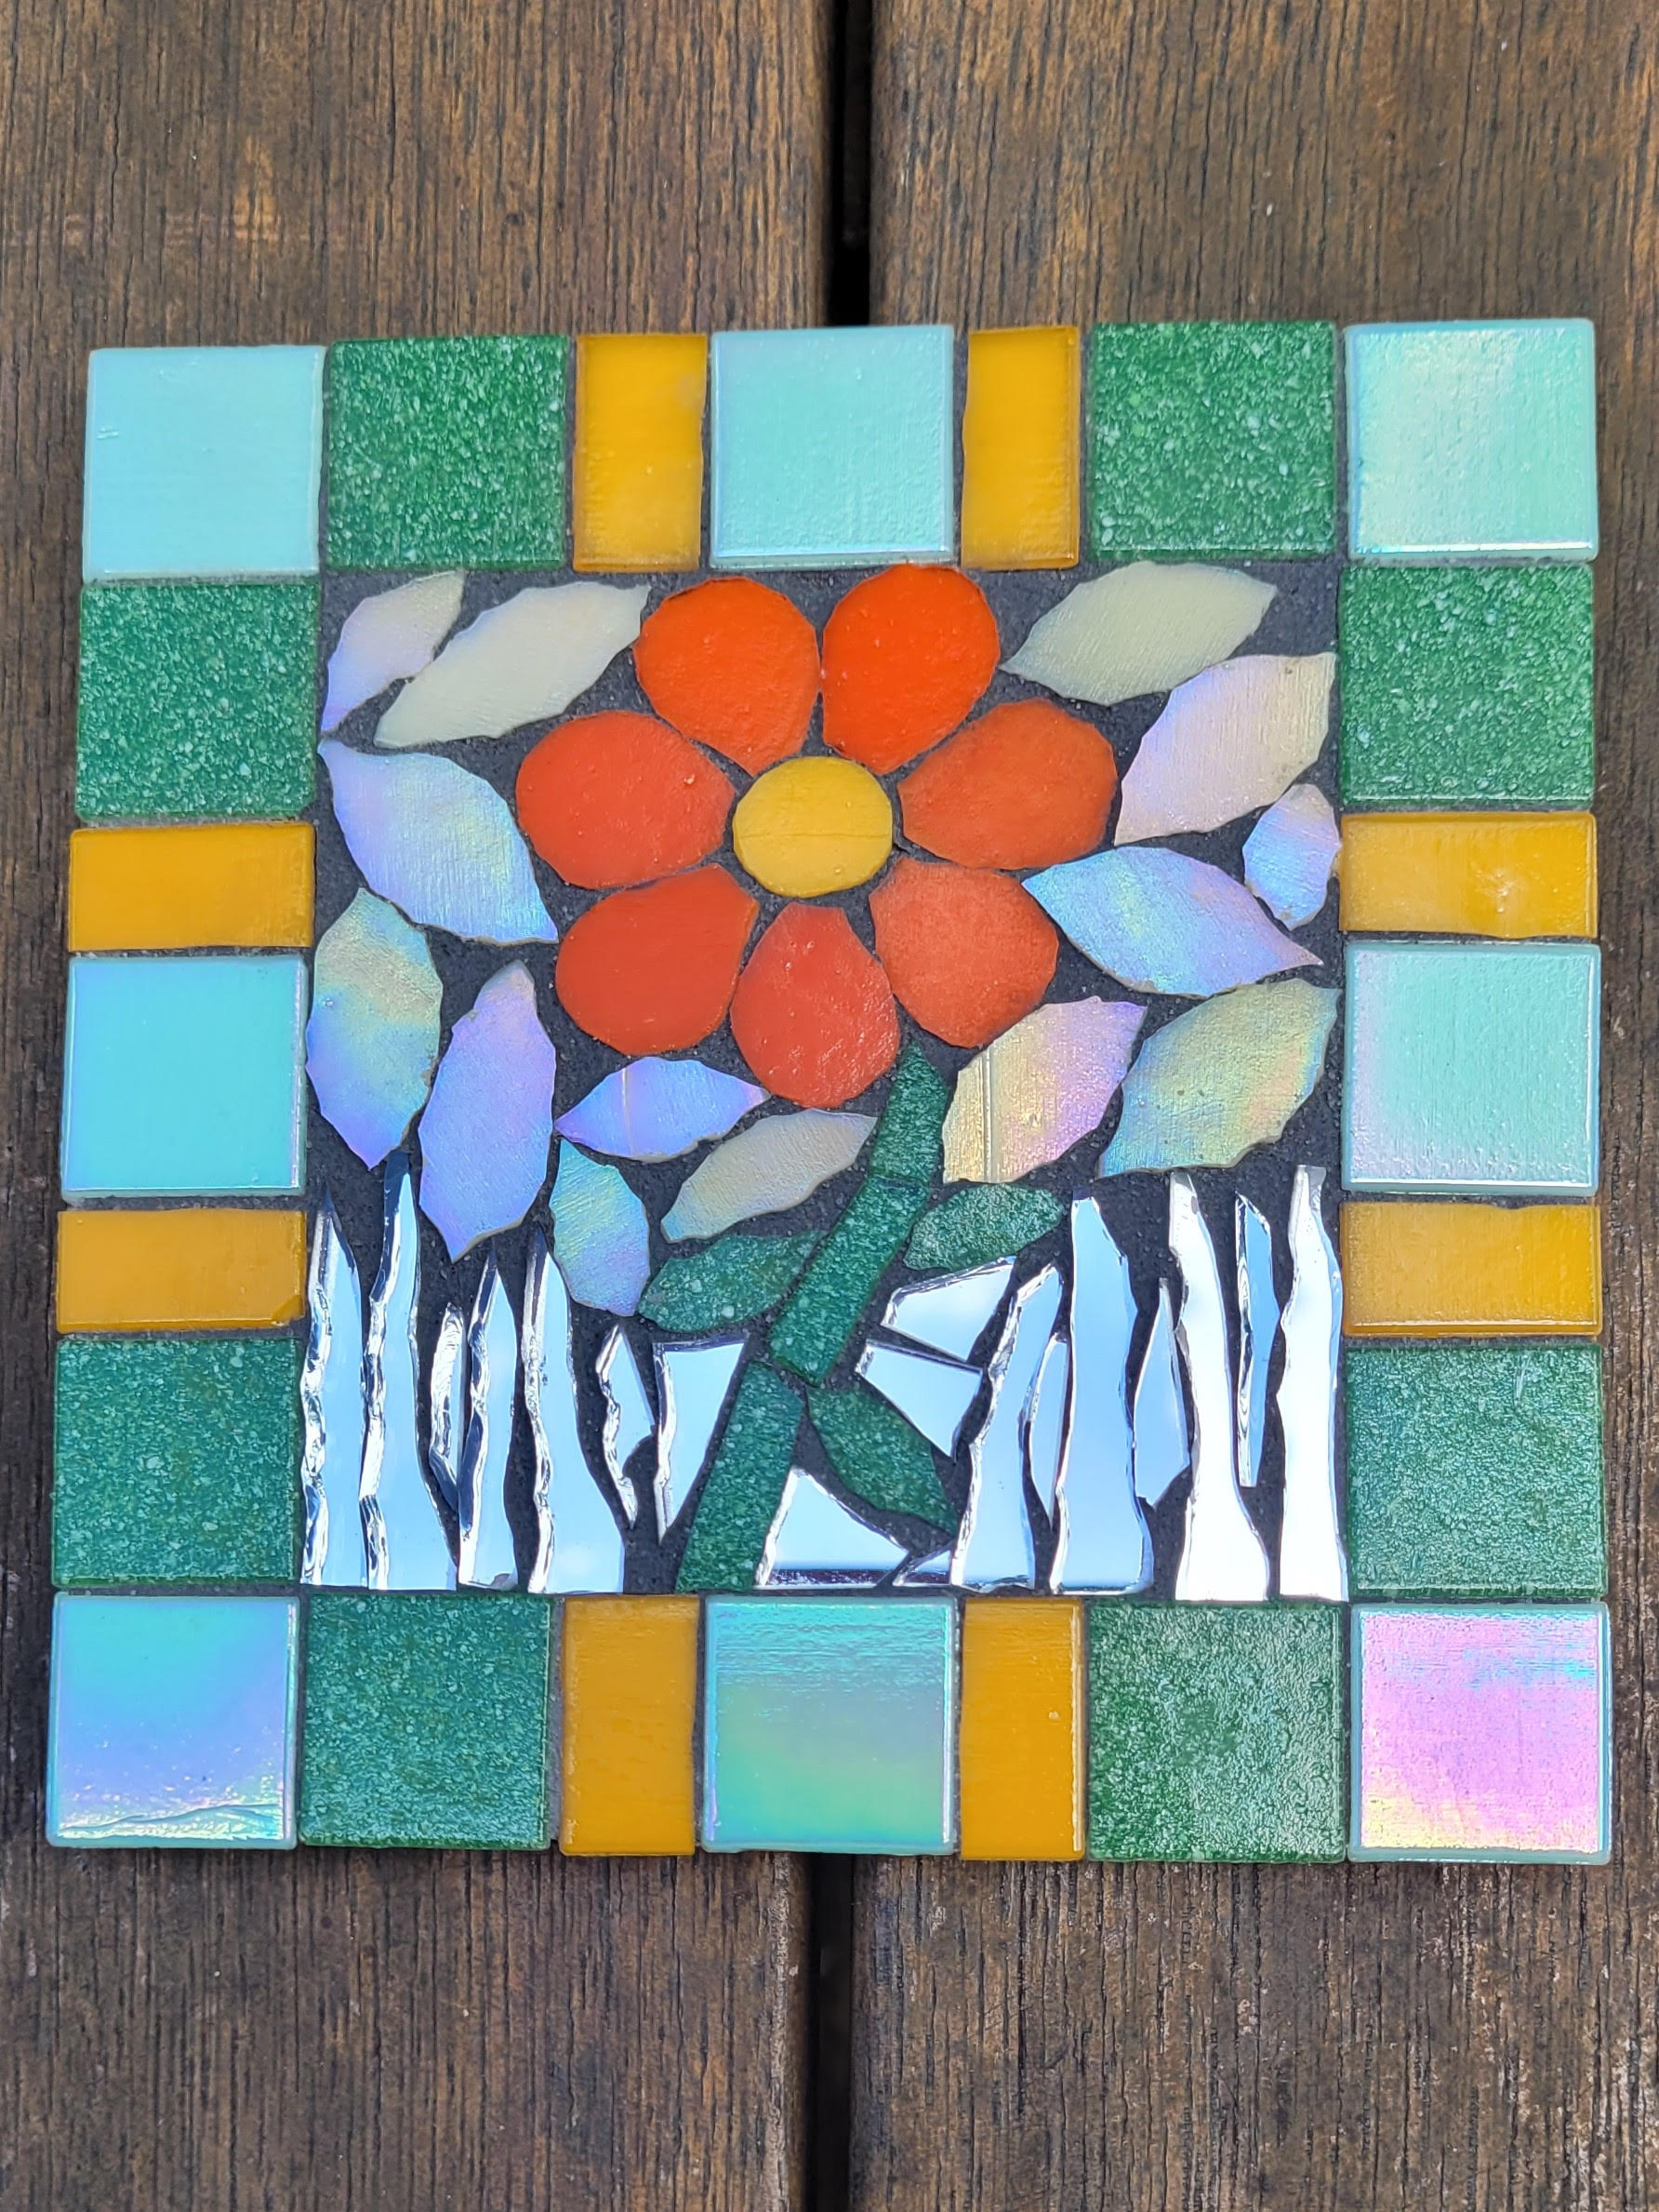 Mosaic Beginners Workshop - 9 July 2022 - Fully Booked